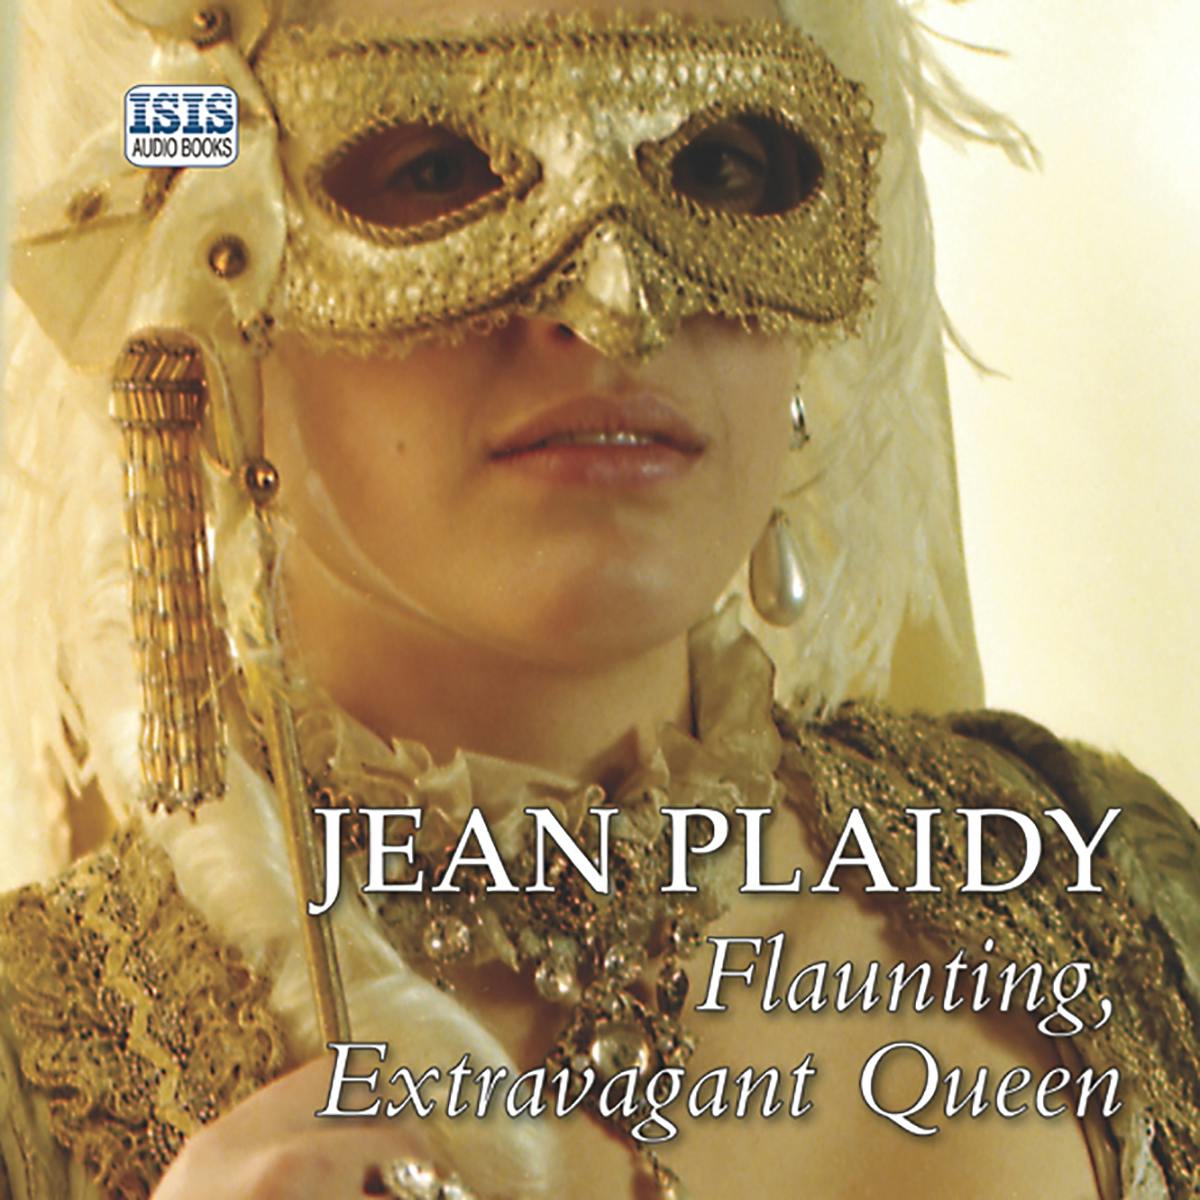 Flaunting, Extravagant Queen - undefined